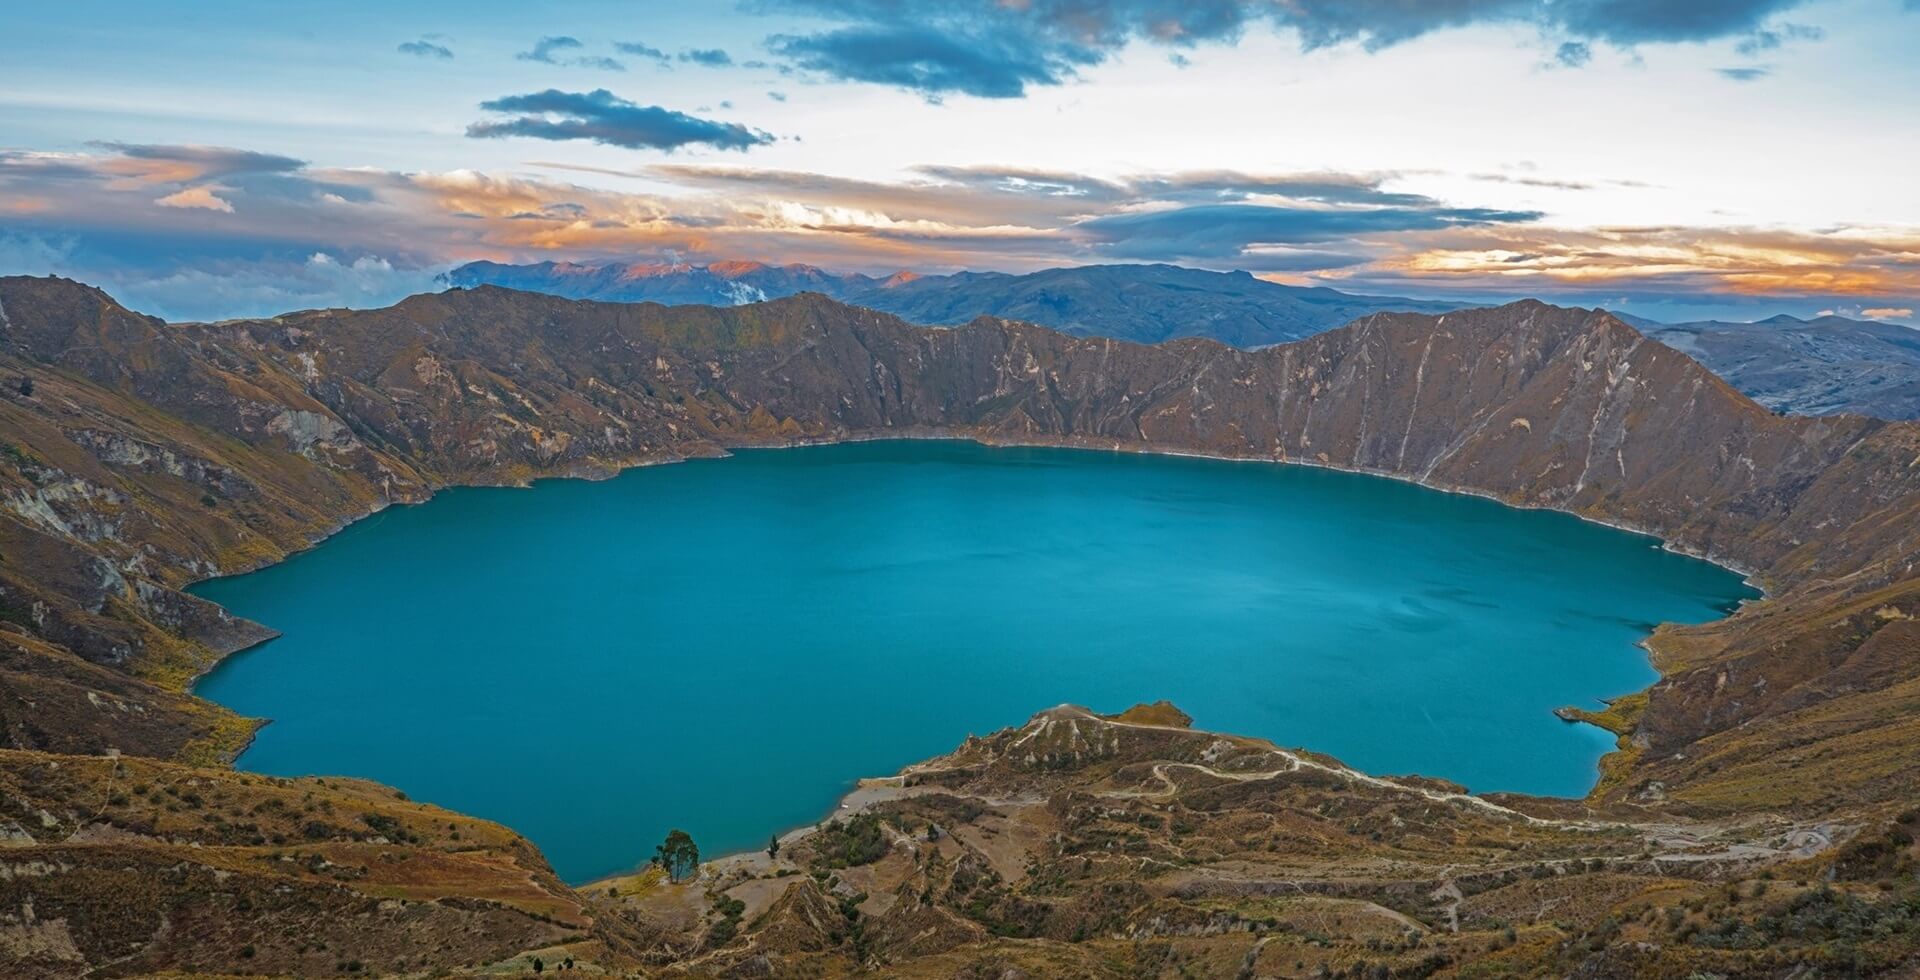 Footer active volcanic crater lake of Quilotoa at sunset located in the Andes mountain range, south of Quito, Ecuador.